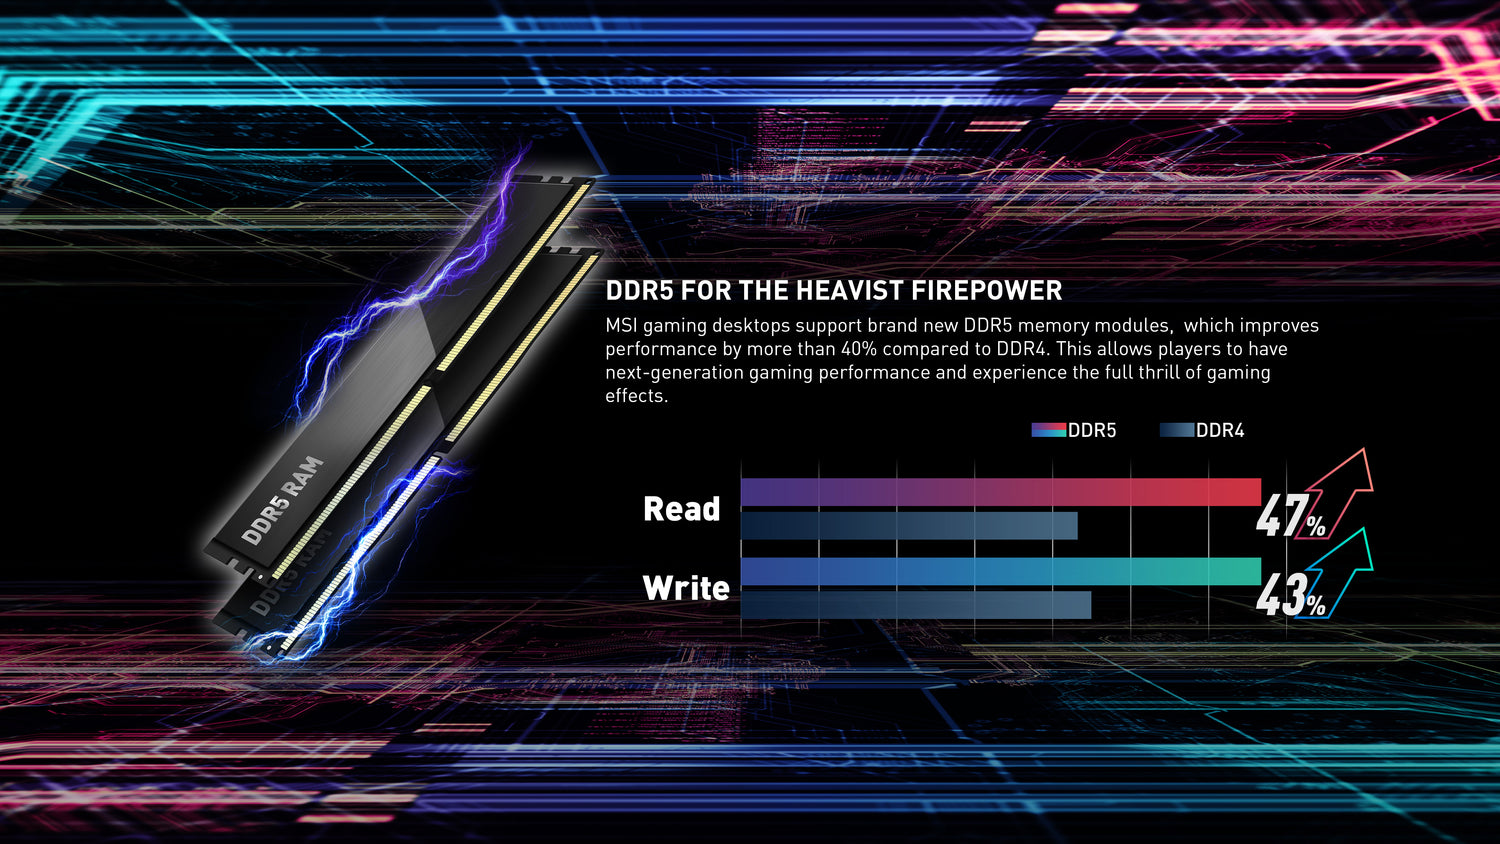 Large bandwidth and more stability. Equipped with DDR5 memory